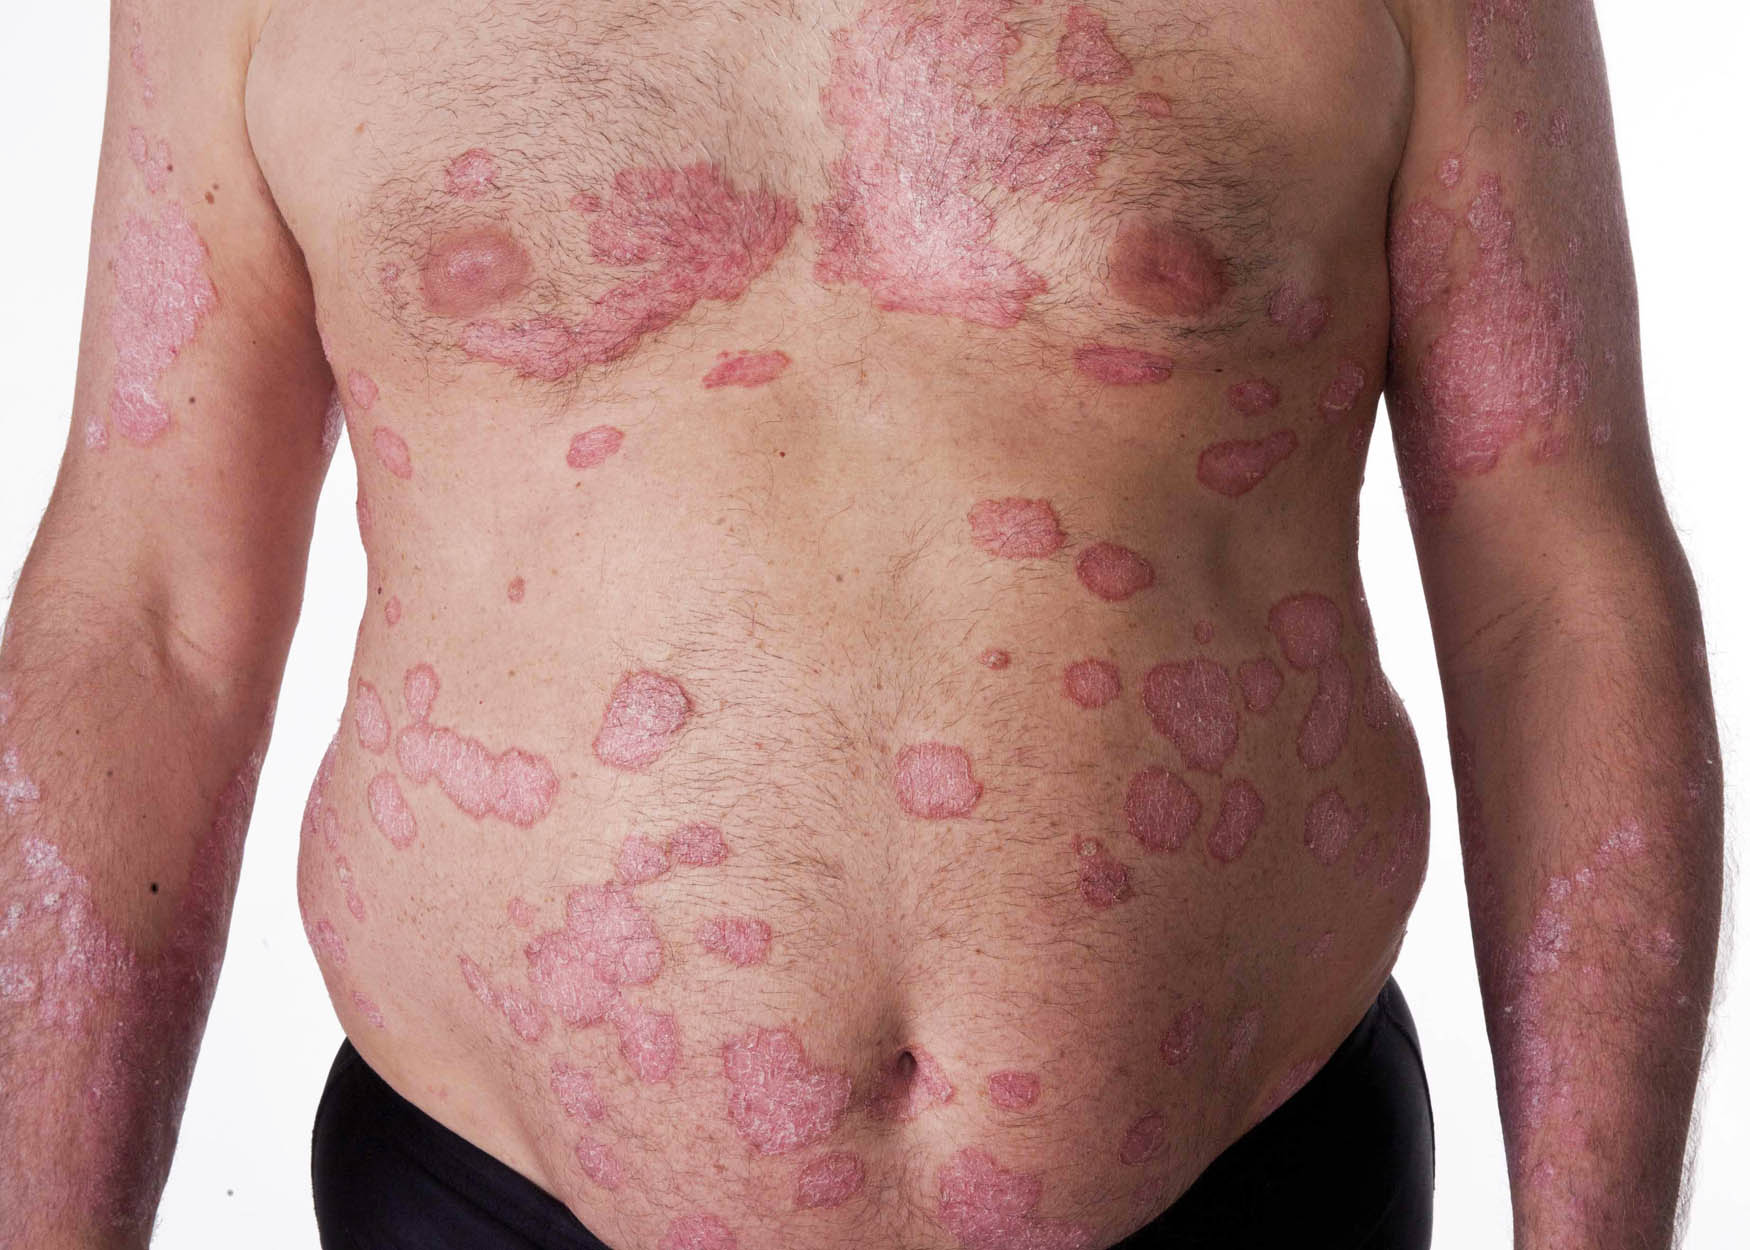 Is TREMFYA the right choice for my plaque psoriasis?